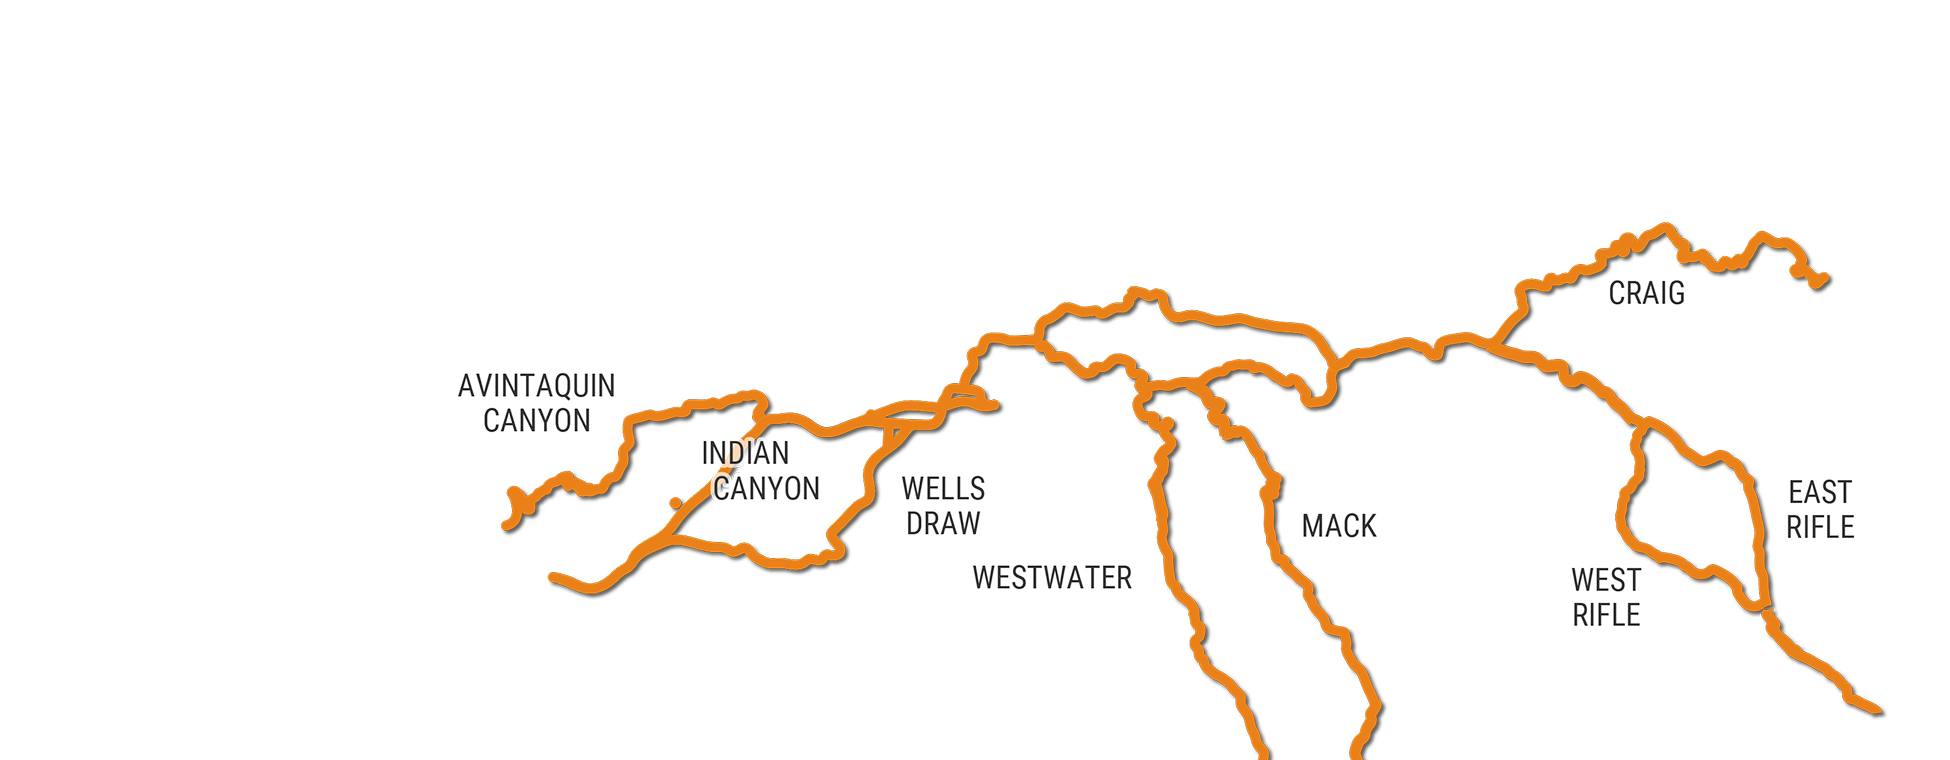 Short Listed Routes